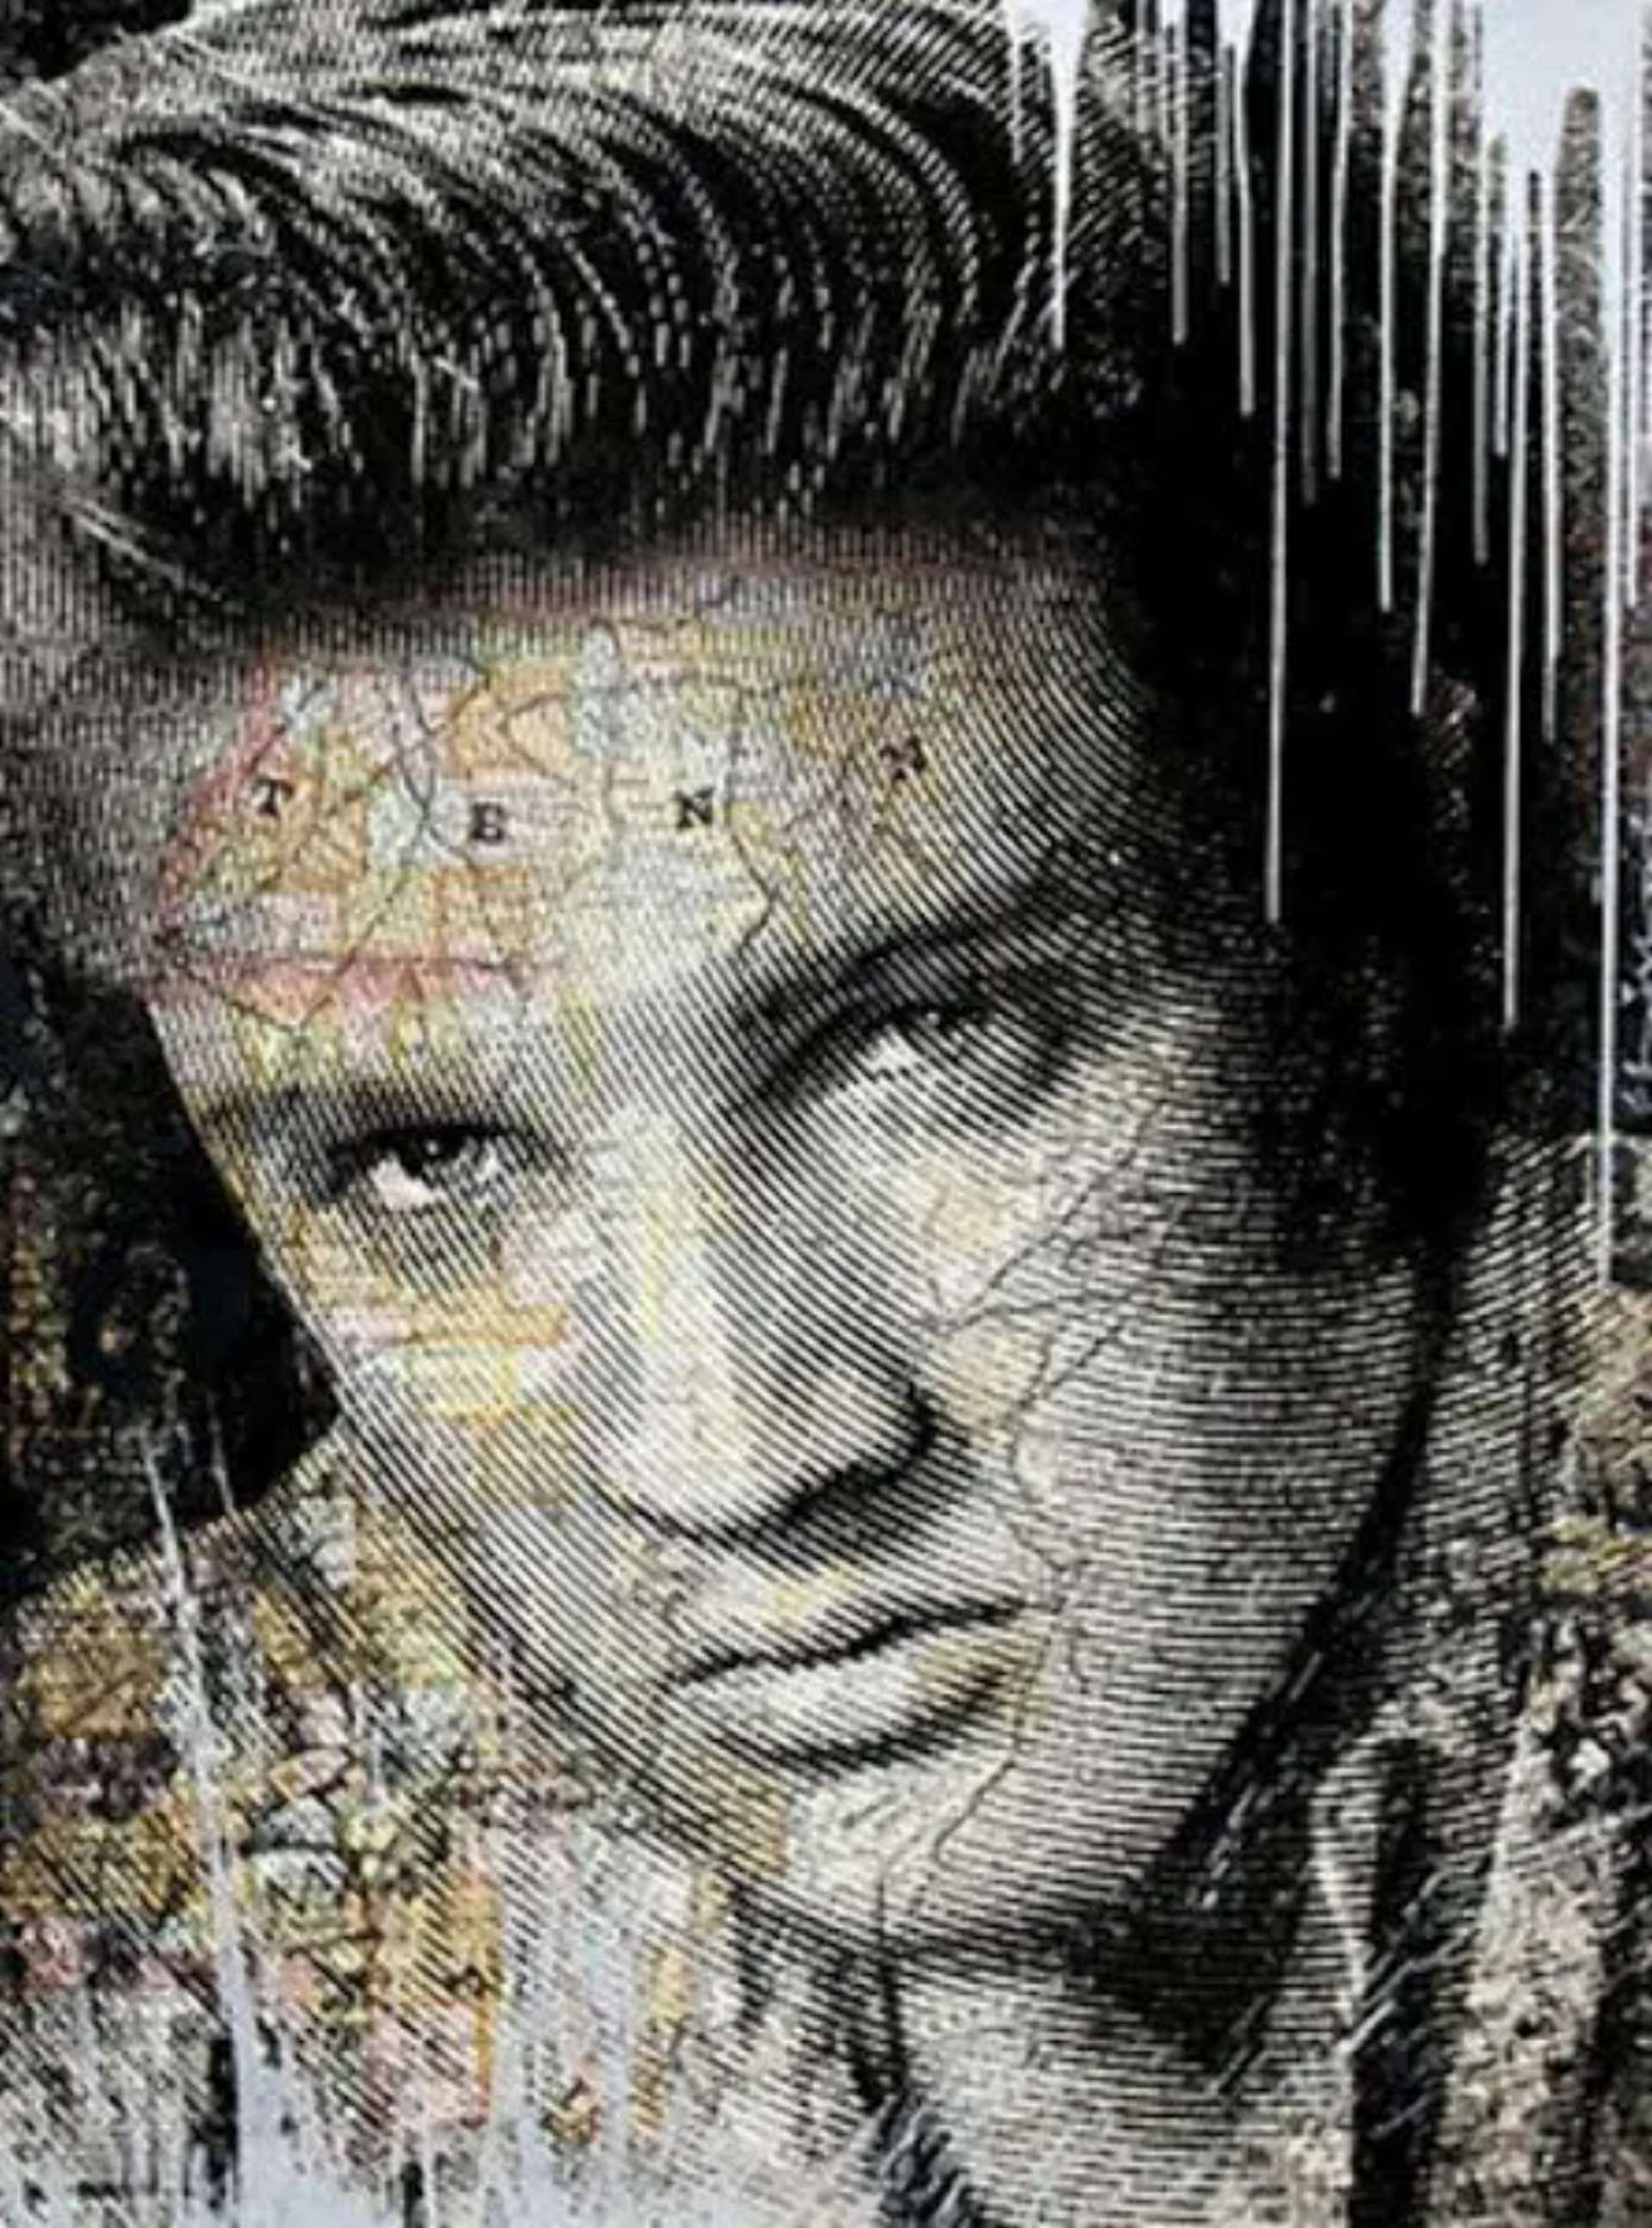 King of Rock and Roll by Mr. Brainwash